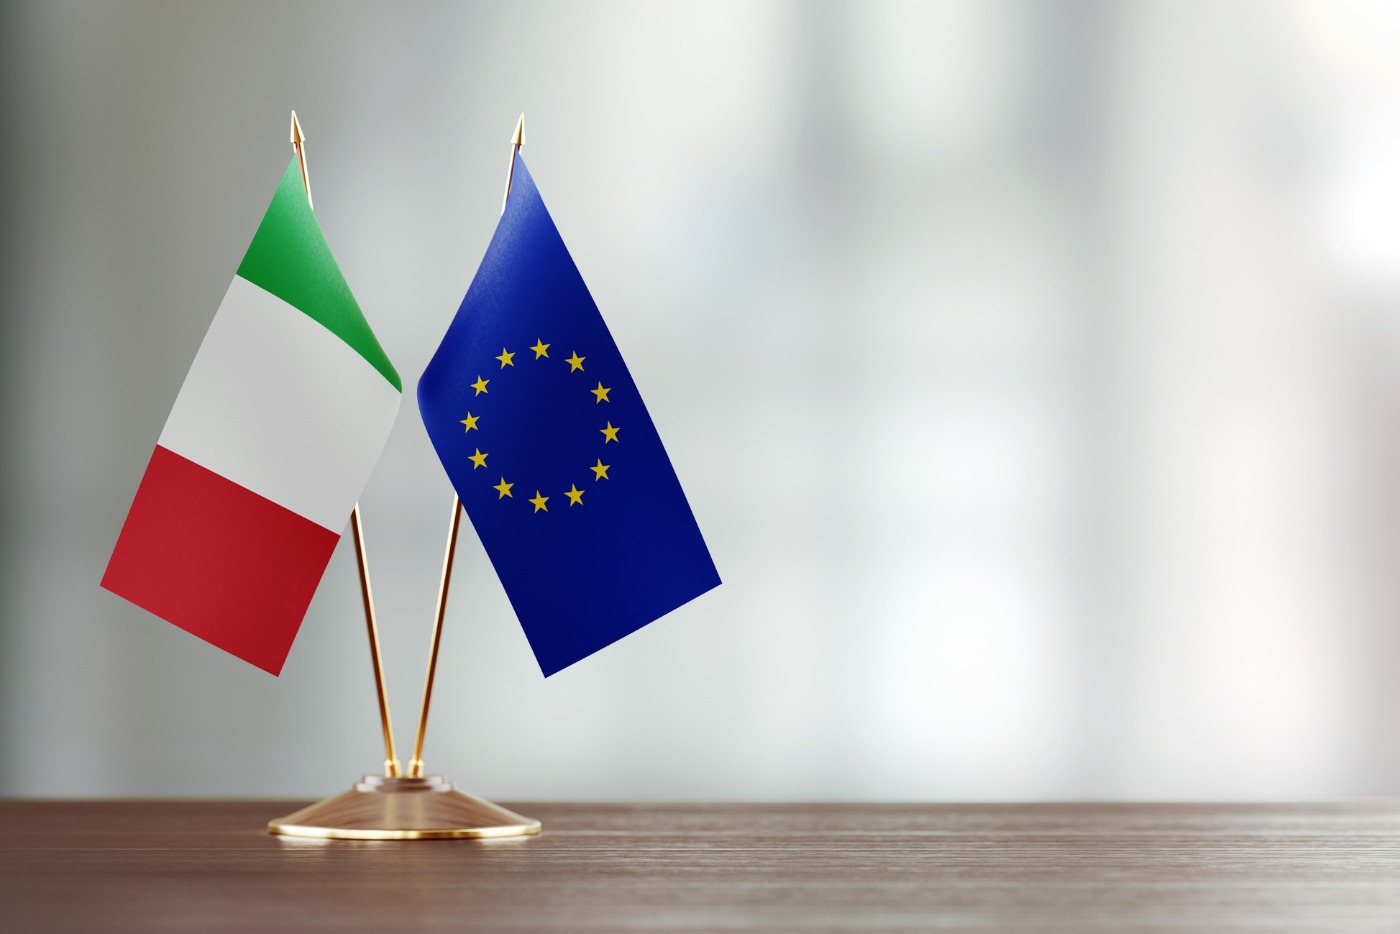 italian-and-european-union-flag-pair-on-a-desk-over-defocused-picture-id925871346